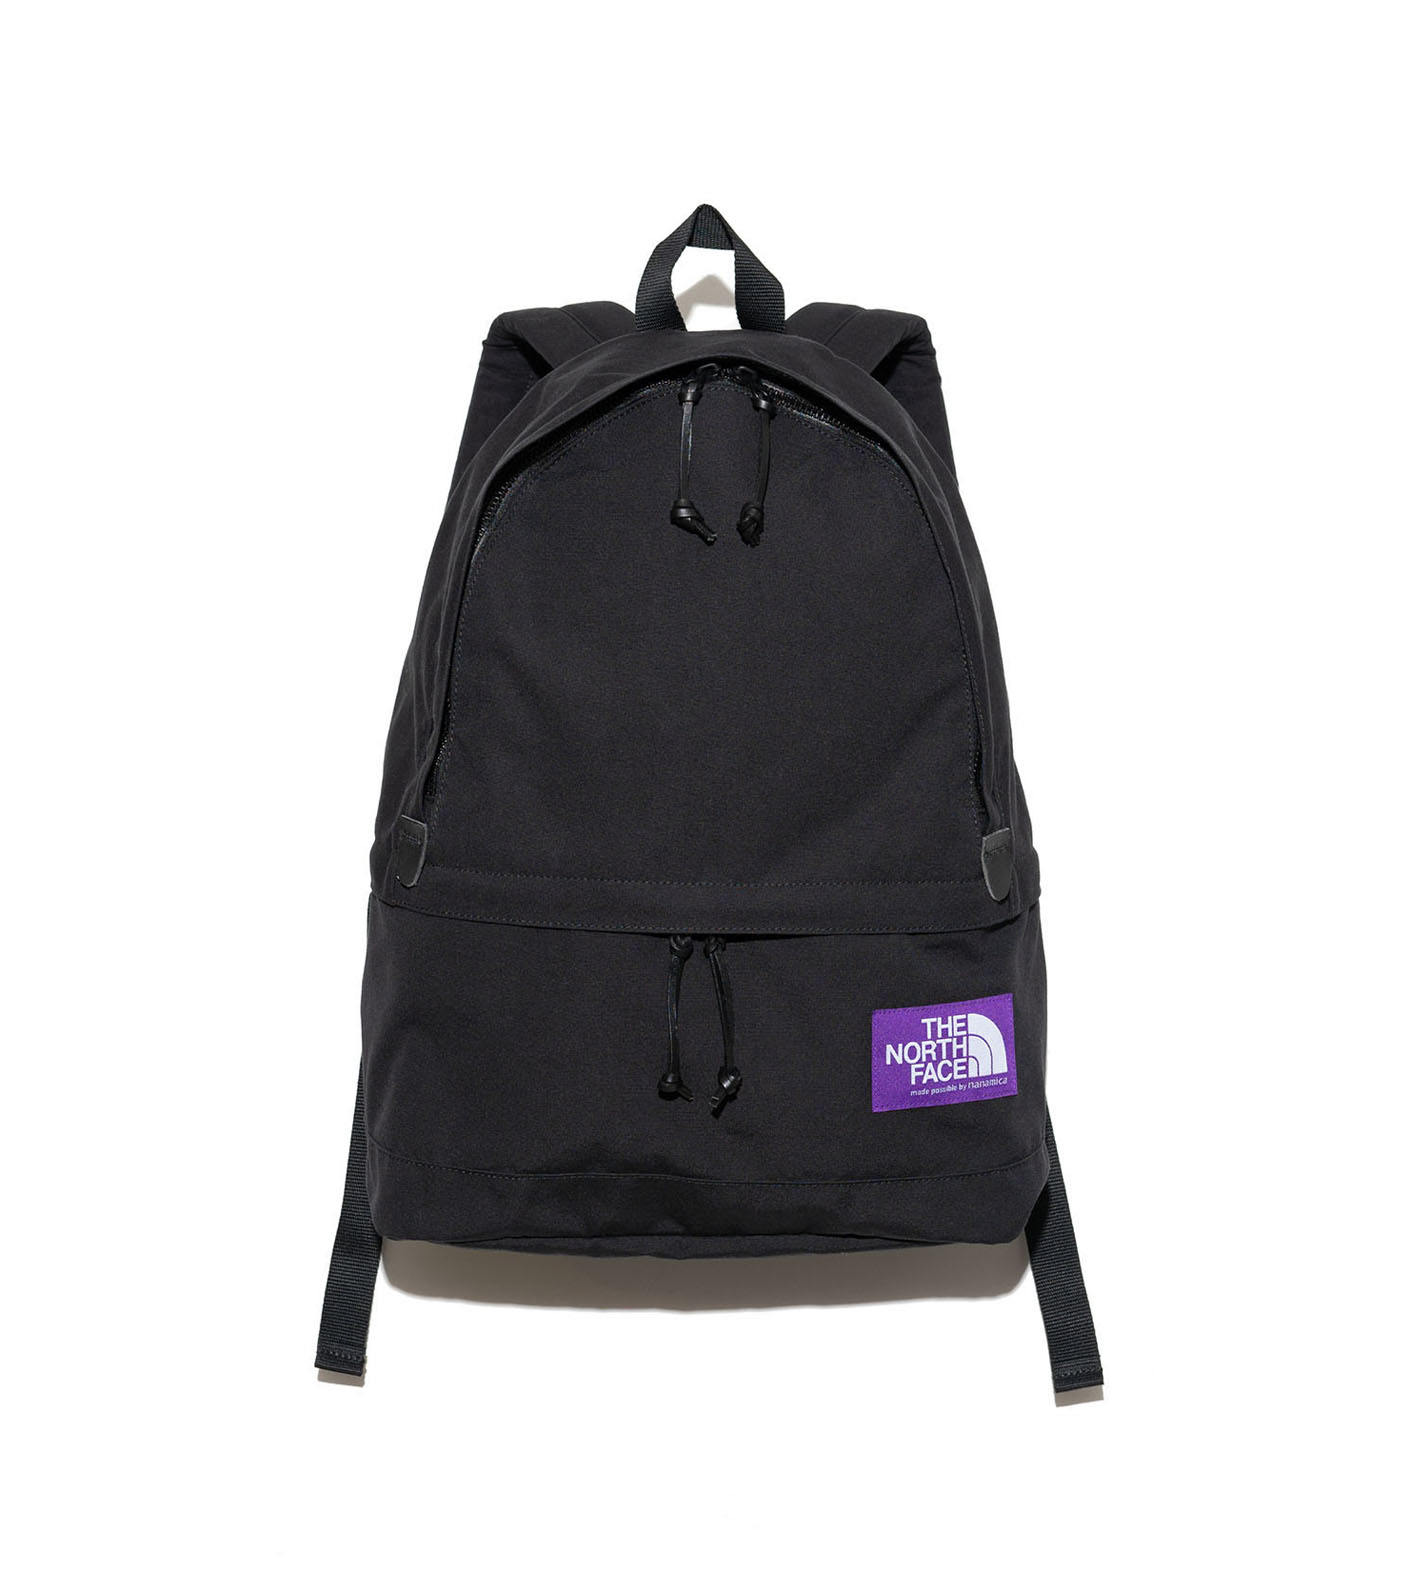 THE NORTH FACE PURPLE LABEL Day Pack 新品